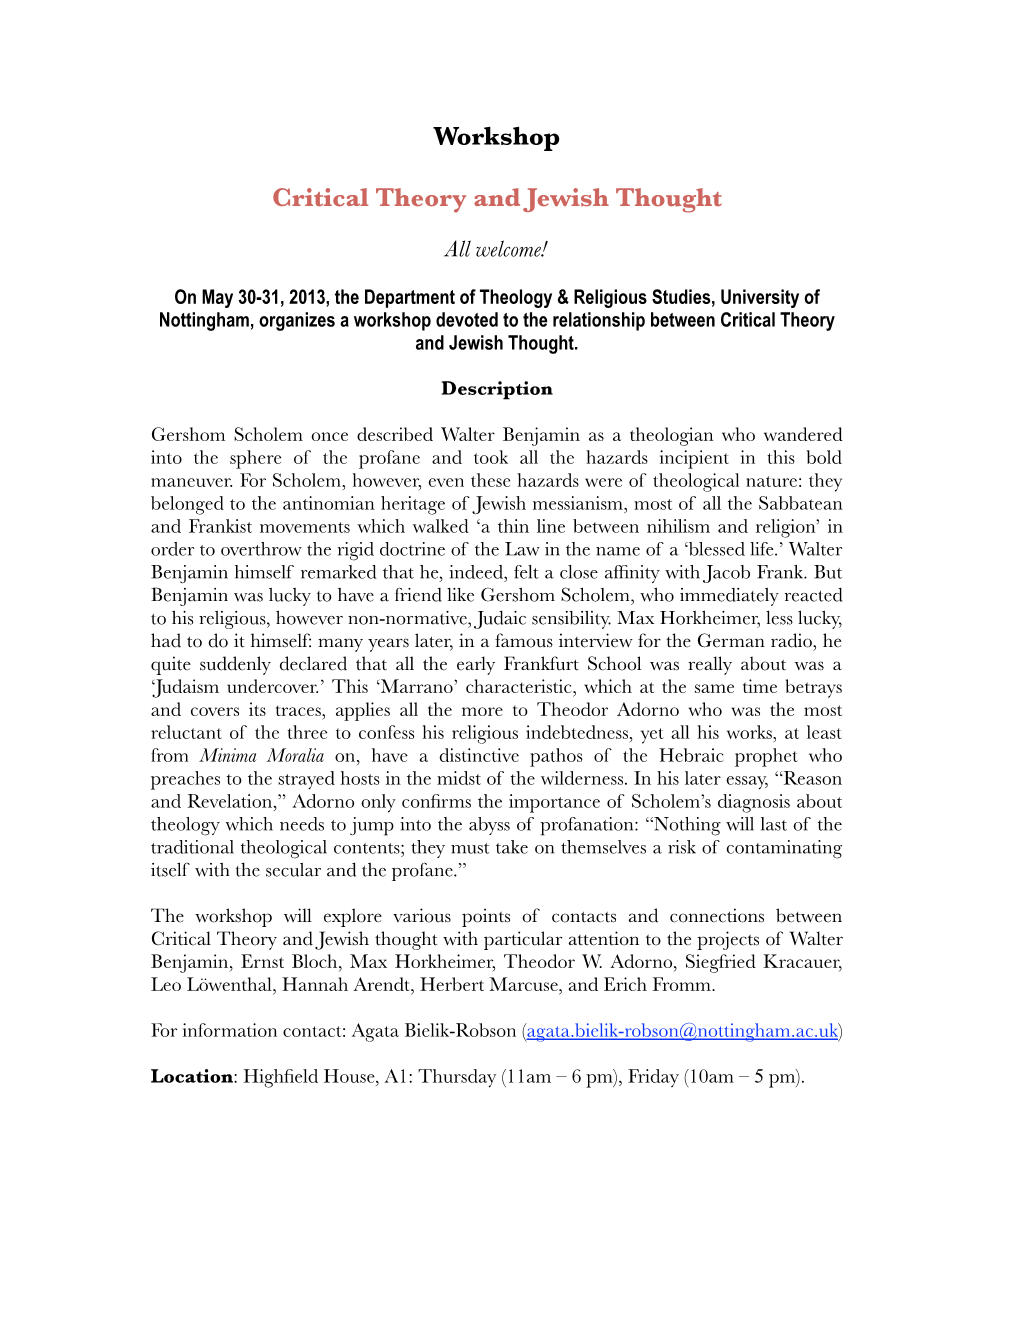 Workshop Critical Theory and Jewish Thought